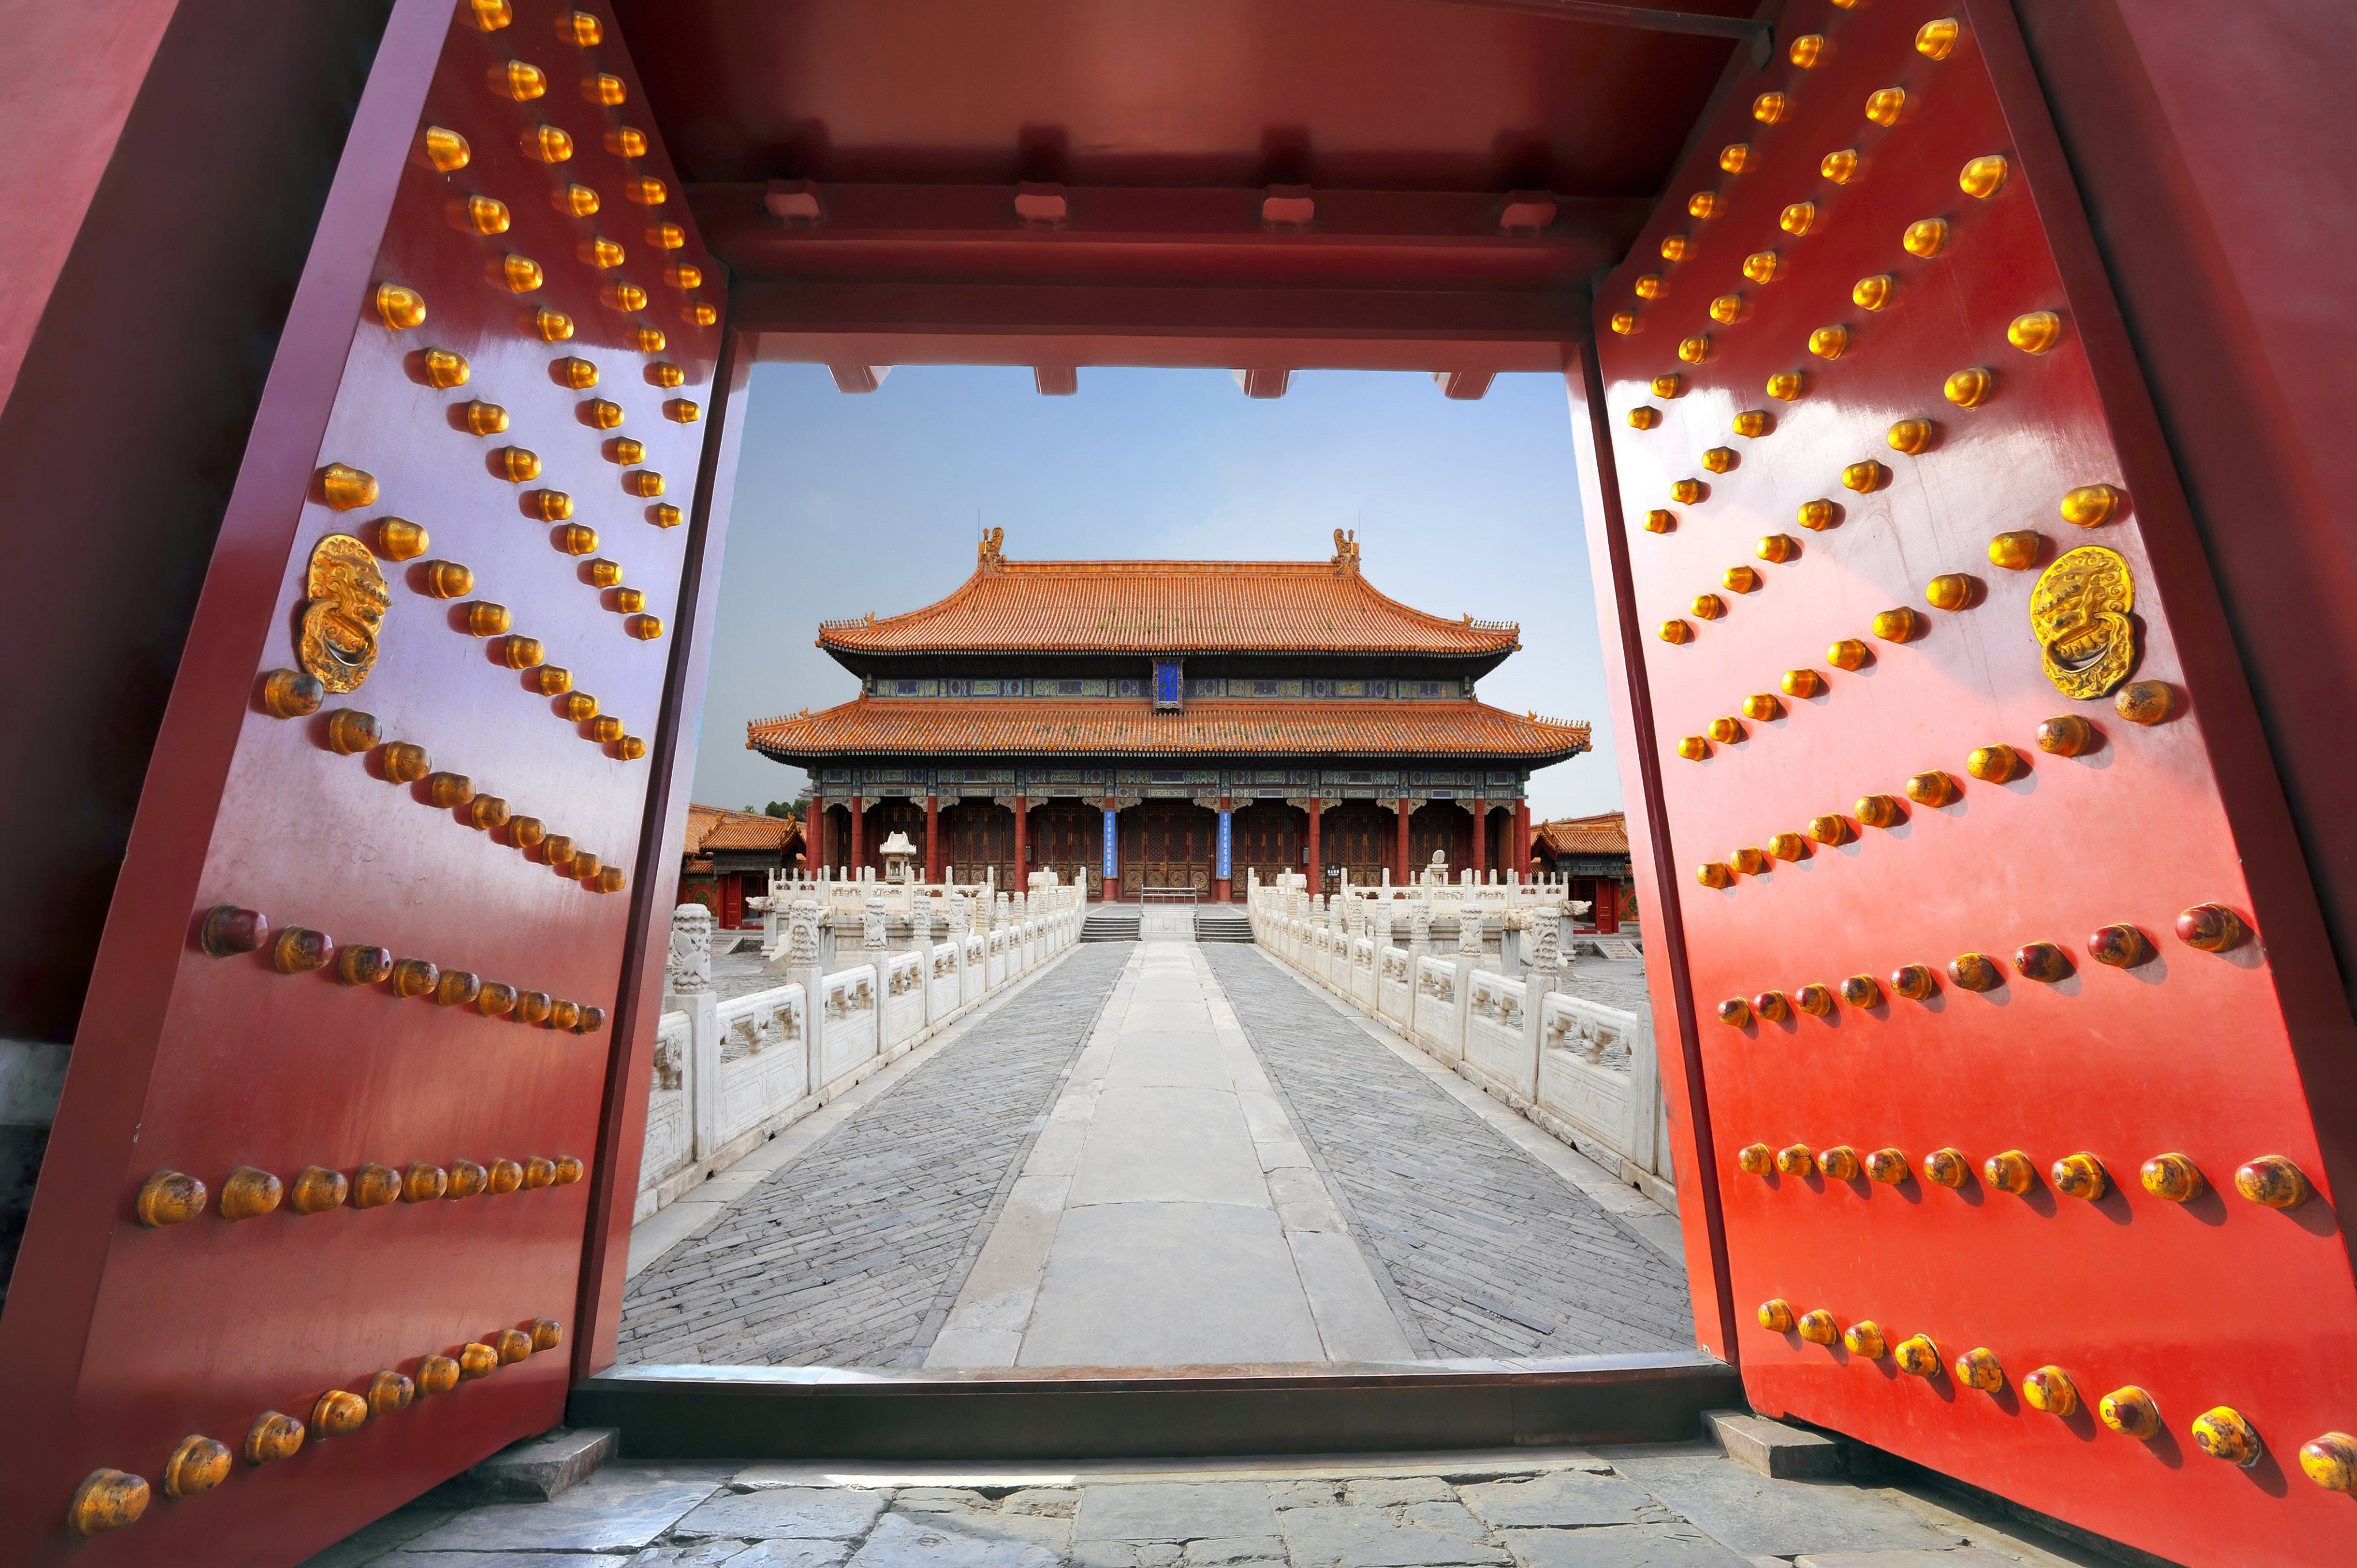 The Forbidden City served as the home of Chinese emperors from the Ming dynasty to the end of the Qing dynasty. Photo: Shutterstock